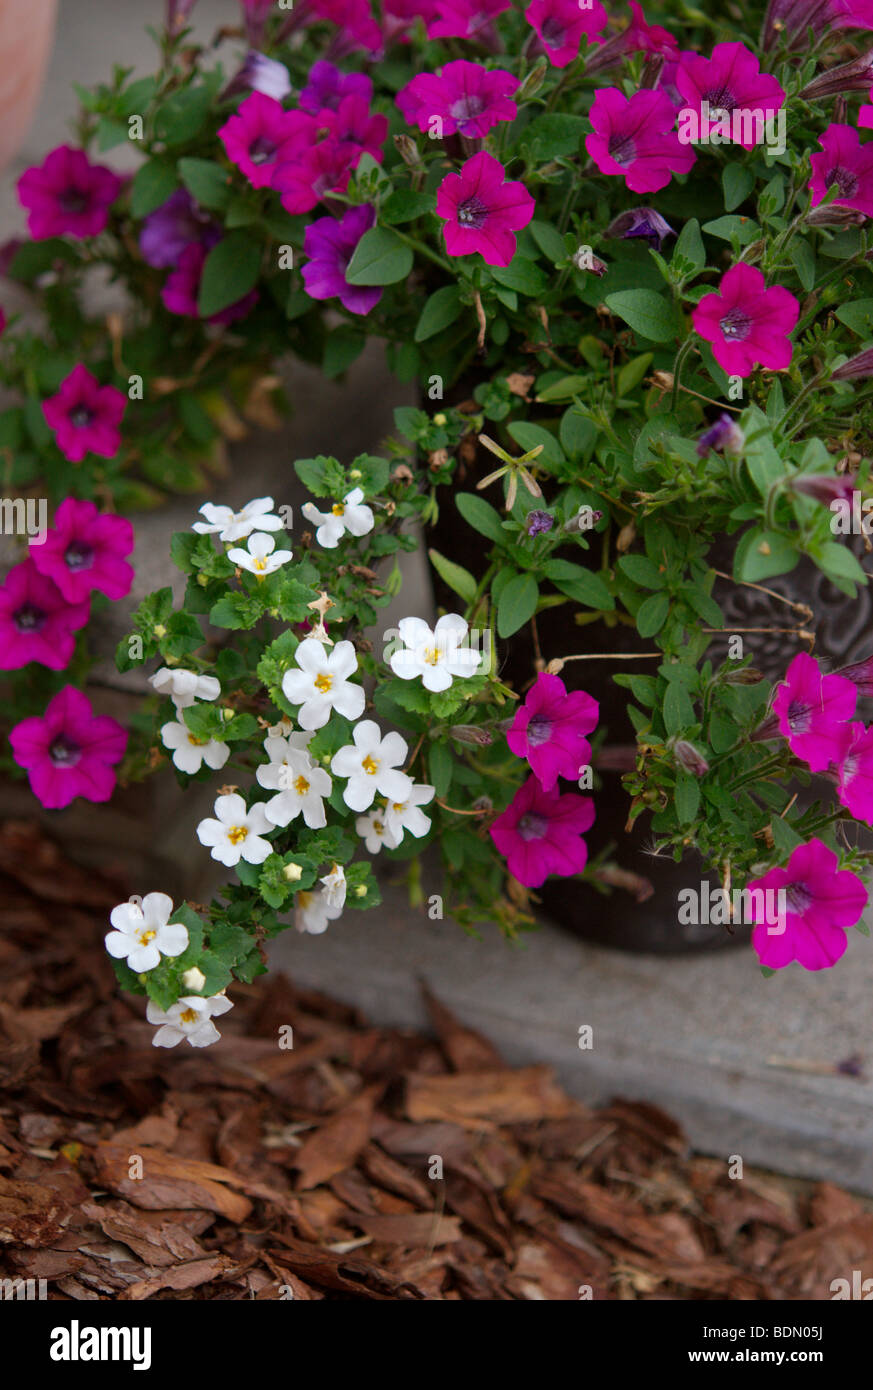 Pink petunias and white snowflakes growing in a container Stock Photo